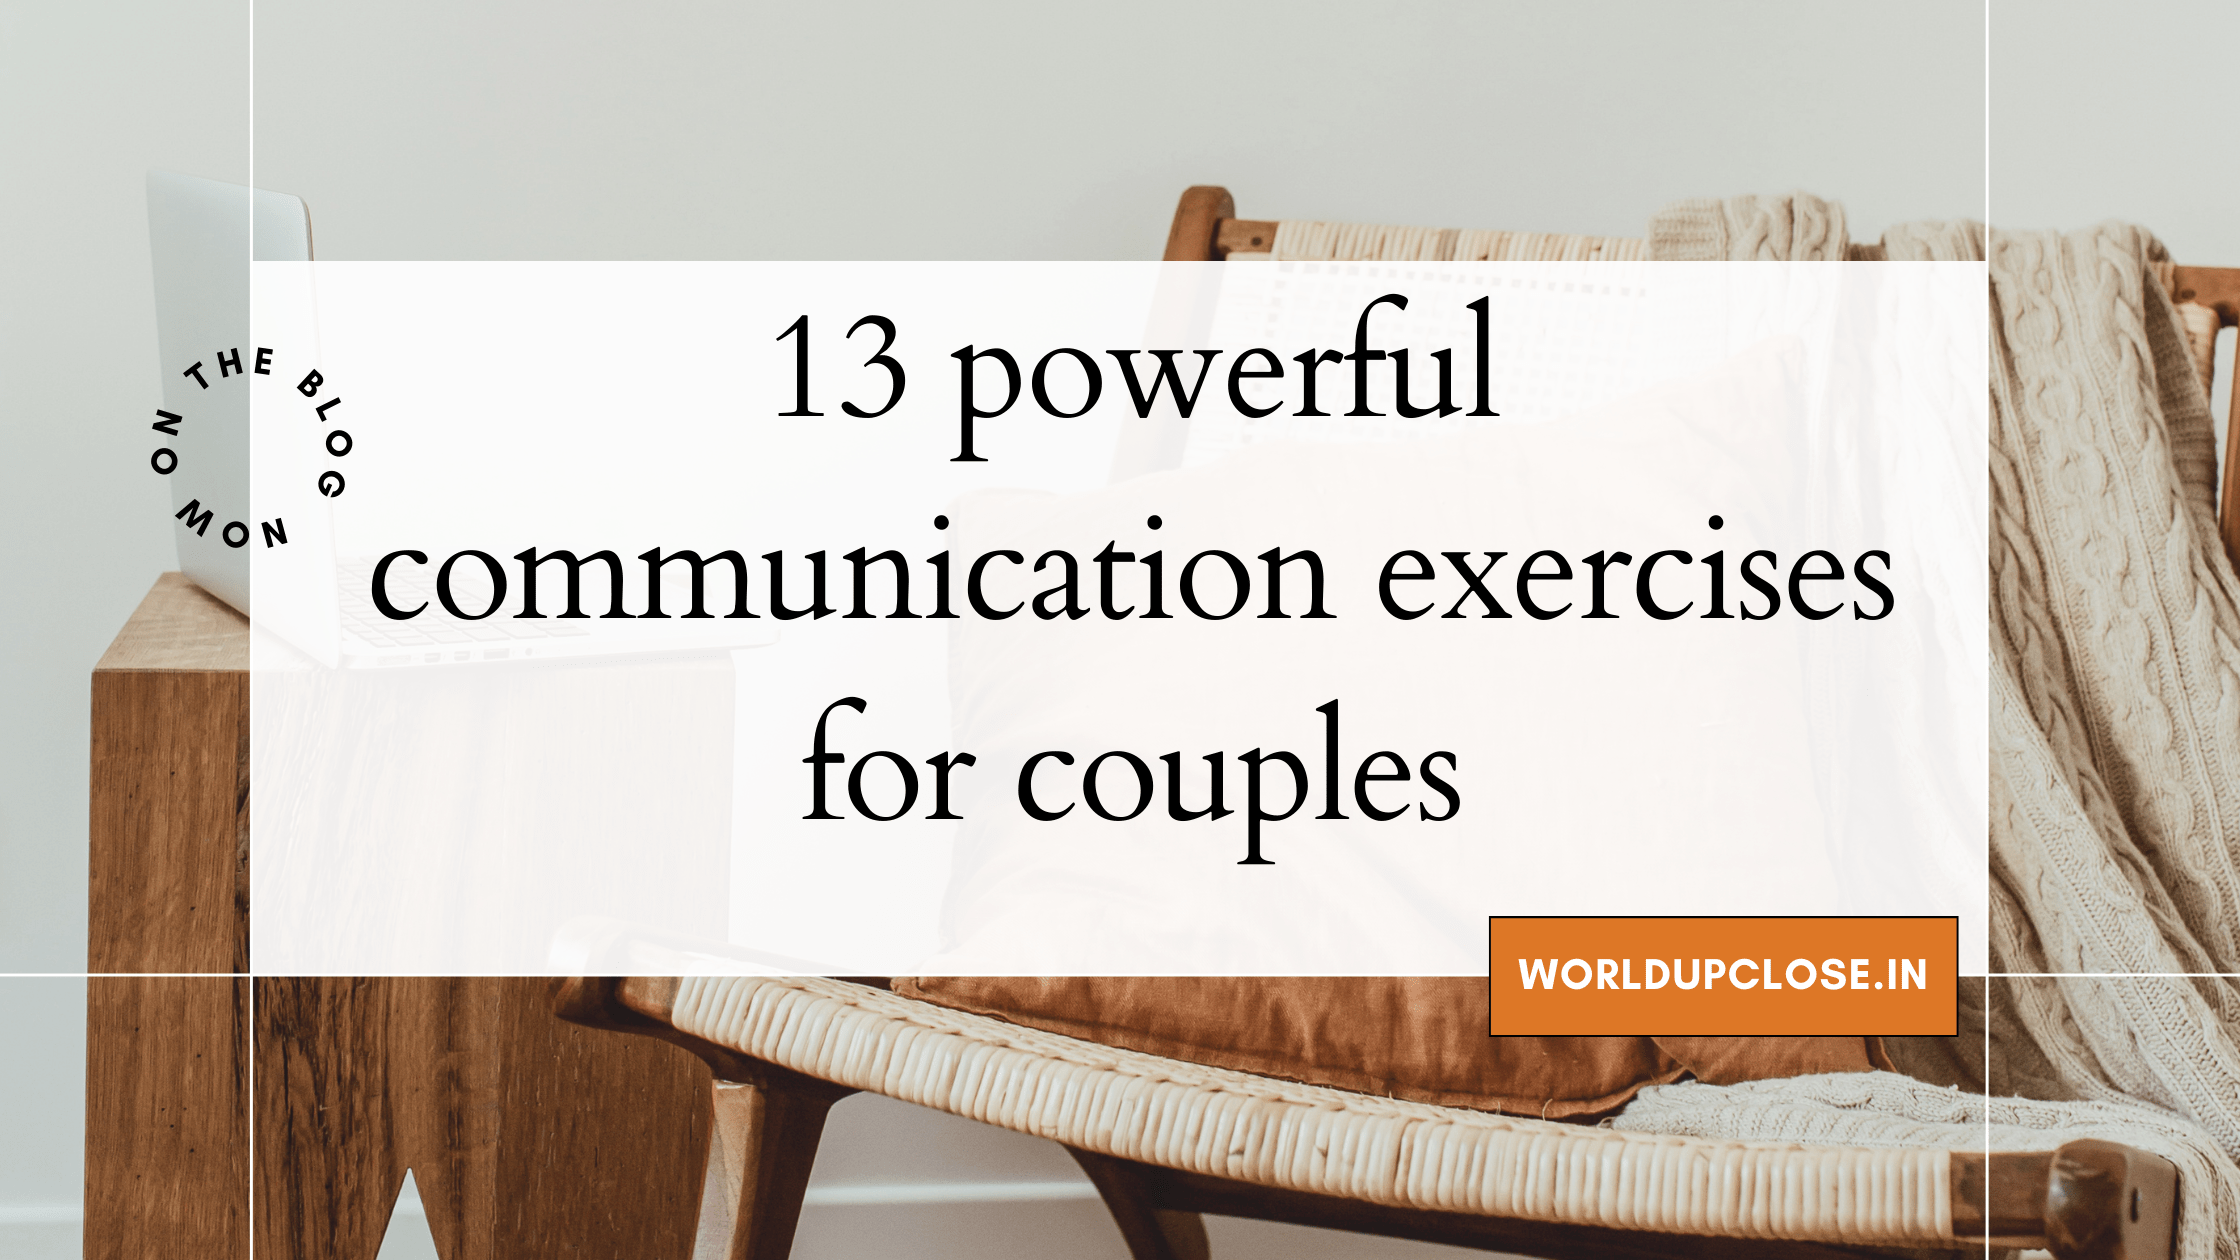 13 powerful communication exercises for couples 22